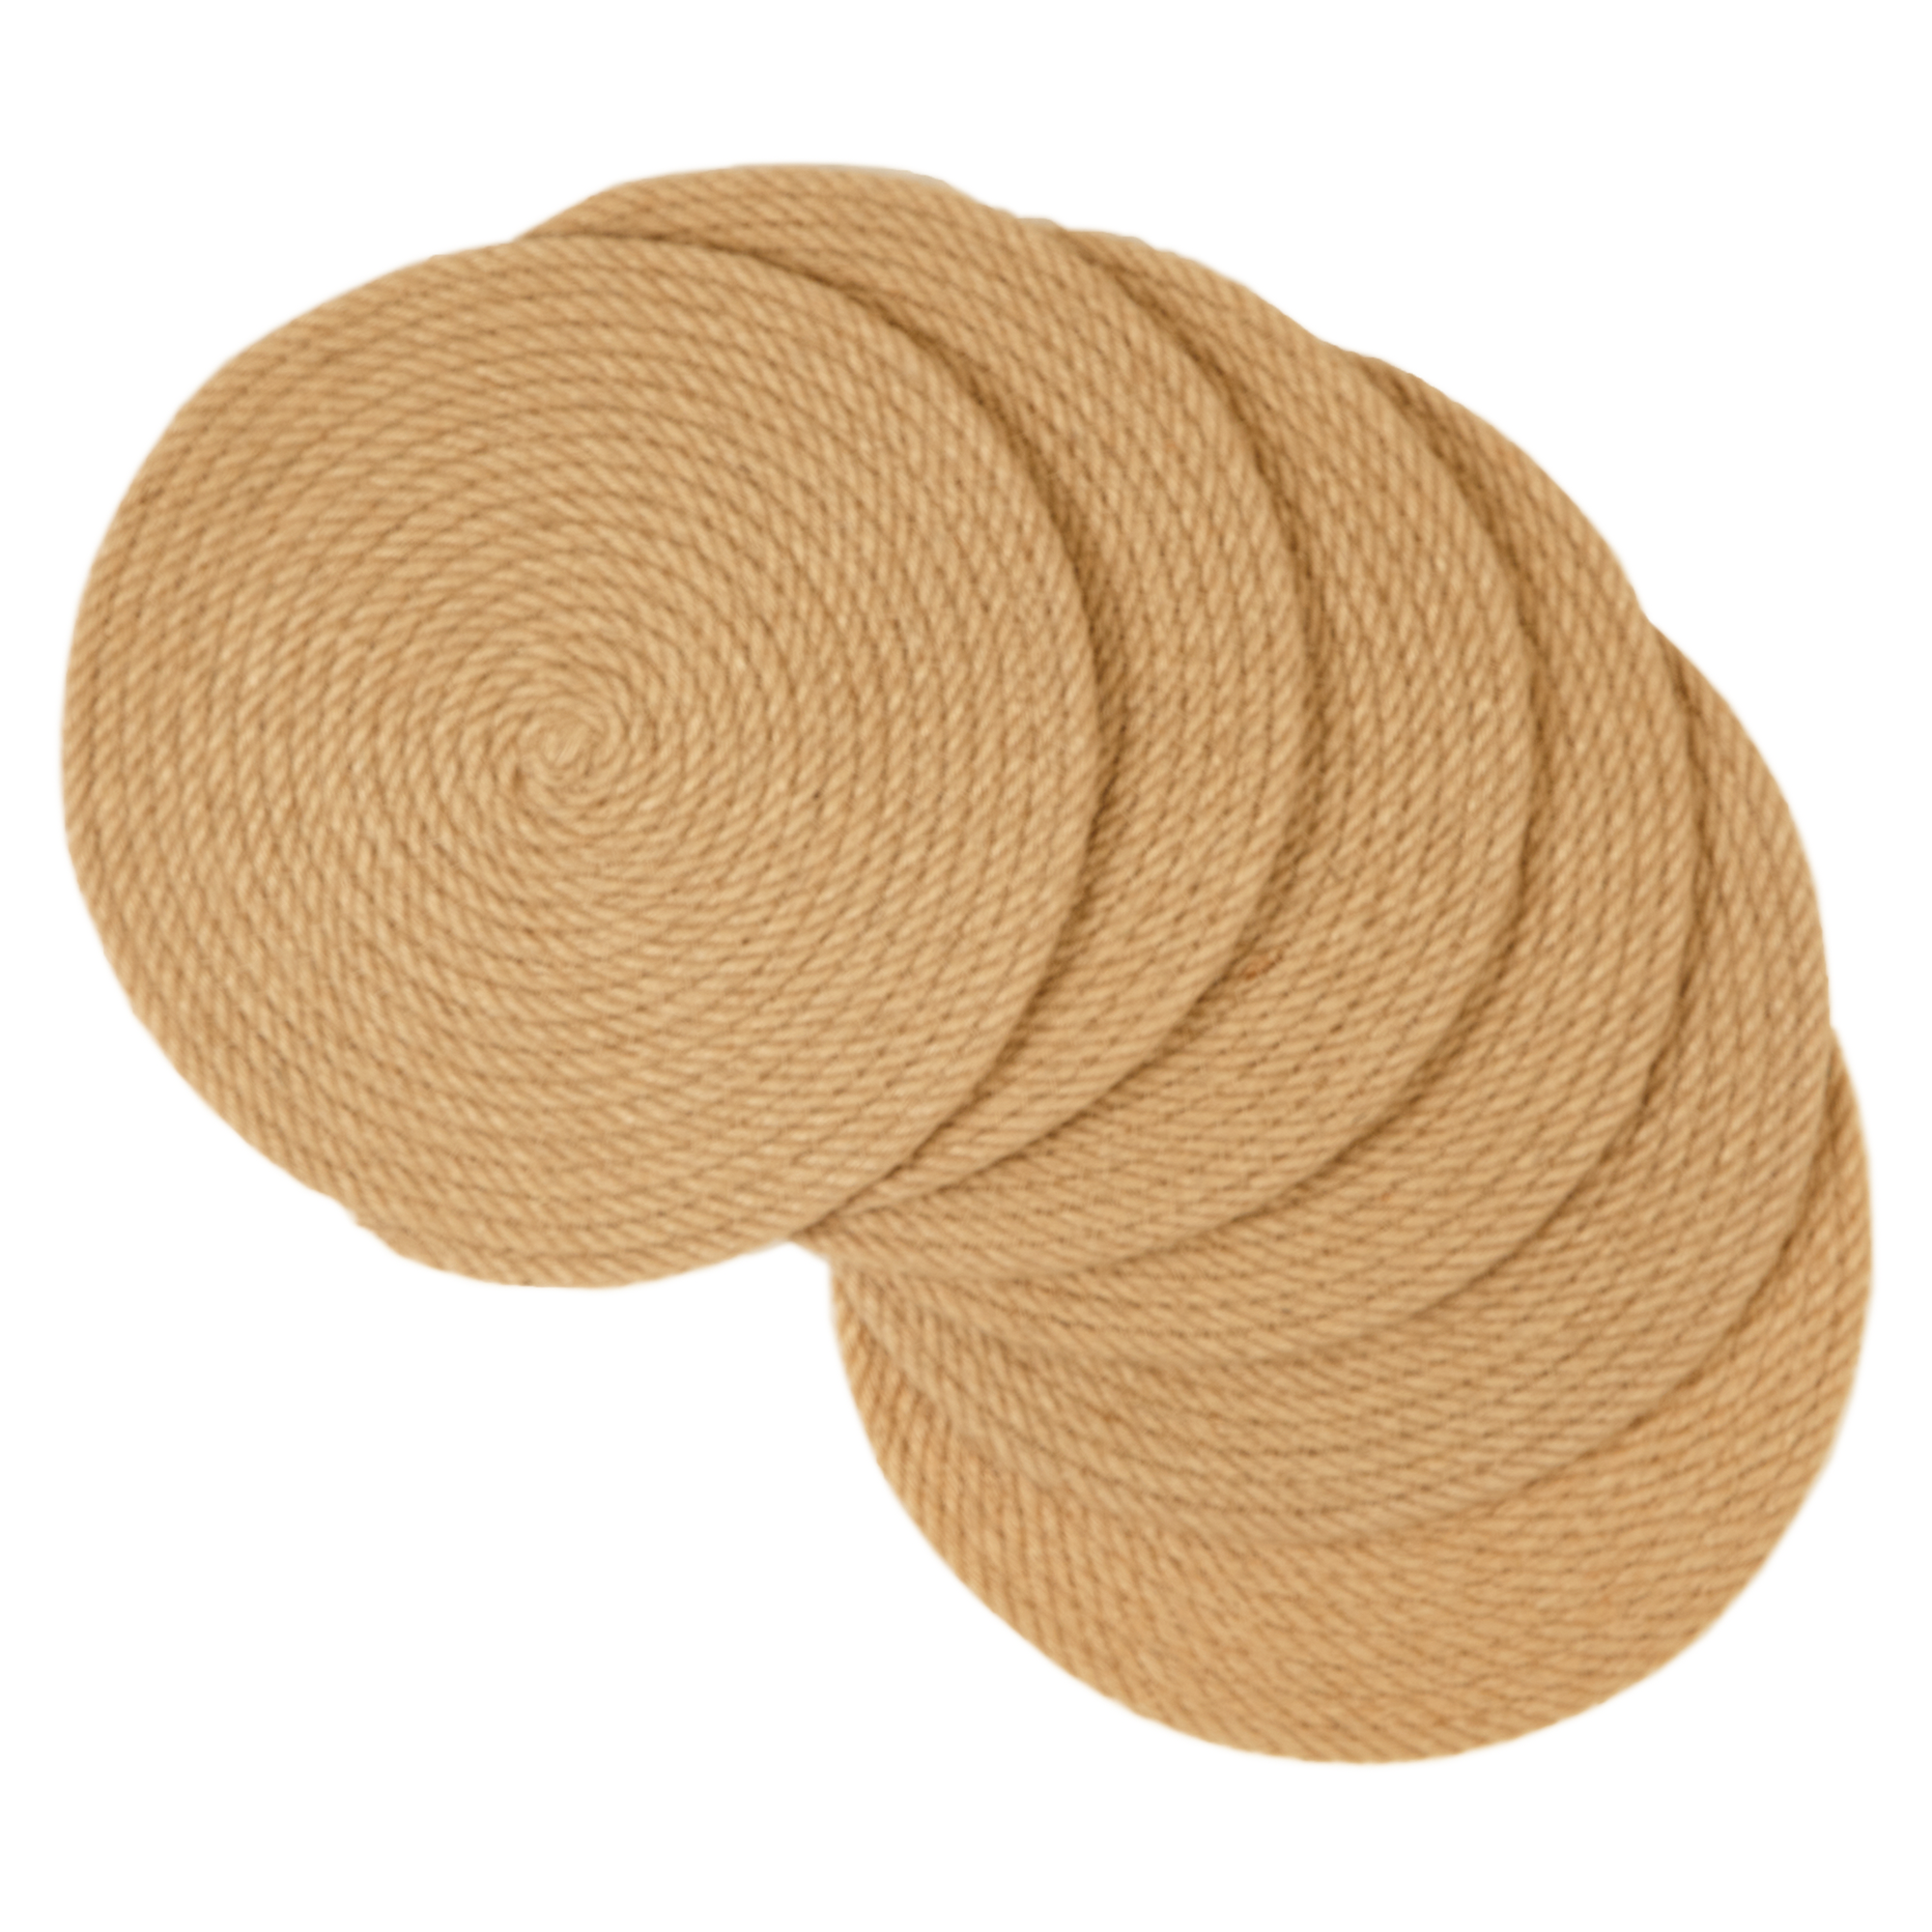 Jute Placemats - Pack Of 6